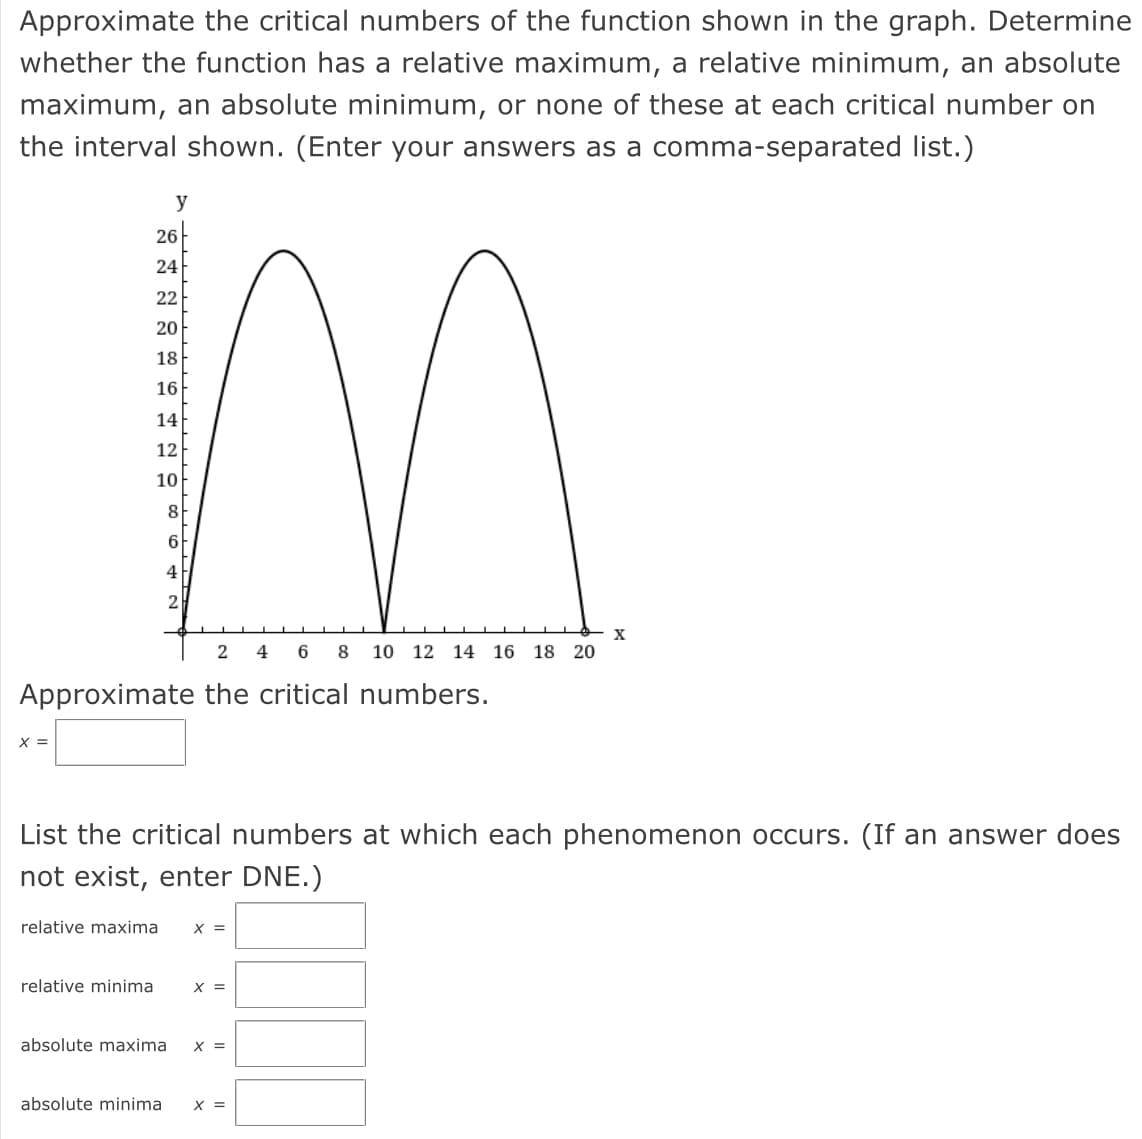 Approximate the critical numbers of the function shown in the graph. Determine
whether the function has a relative maximum, a relative minimum, an absolute
maximum, an absolute minimum, or none of these at each critical number on
the interval shown. (Enter your answers as a comma-separated list.)
y
26
24
22
20
18
16
14
12
10
8
4
X
6
8
10 12 14 16
18 20
Approximate the critical numbers.
X =
List the critical numbers at which each phenomenon occurs. (If an answer does
not exist, enter DNE.)
relative maxima
X =
relative minima
X =
absolute maxima
X =
absolute minima
X =
